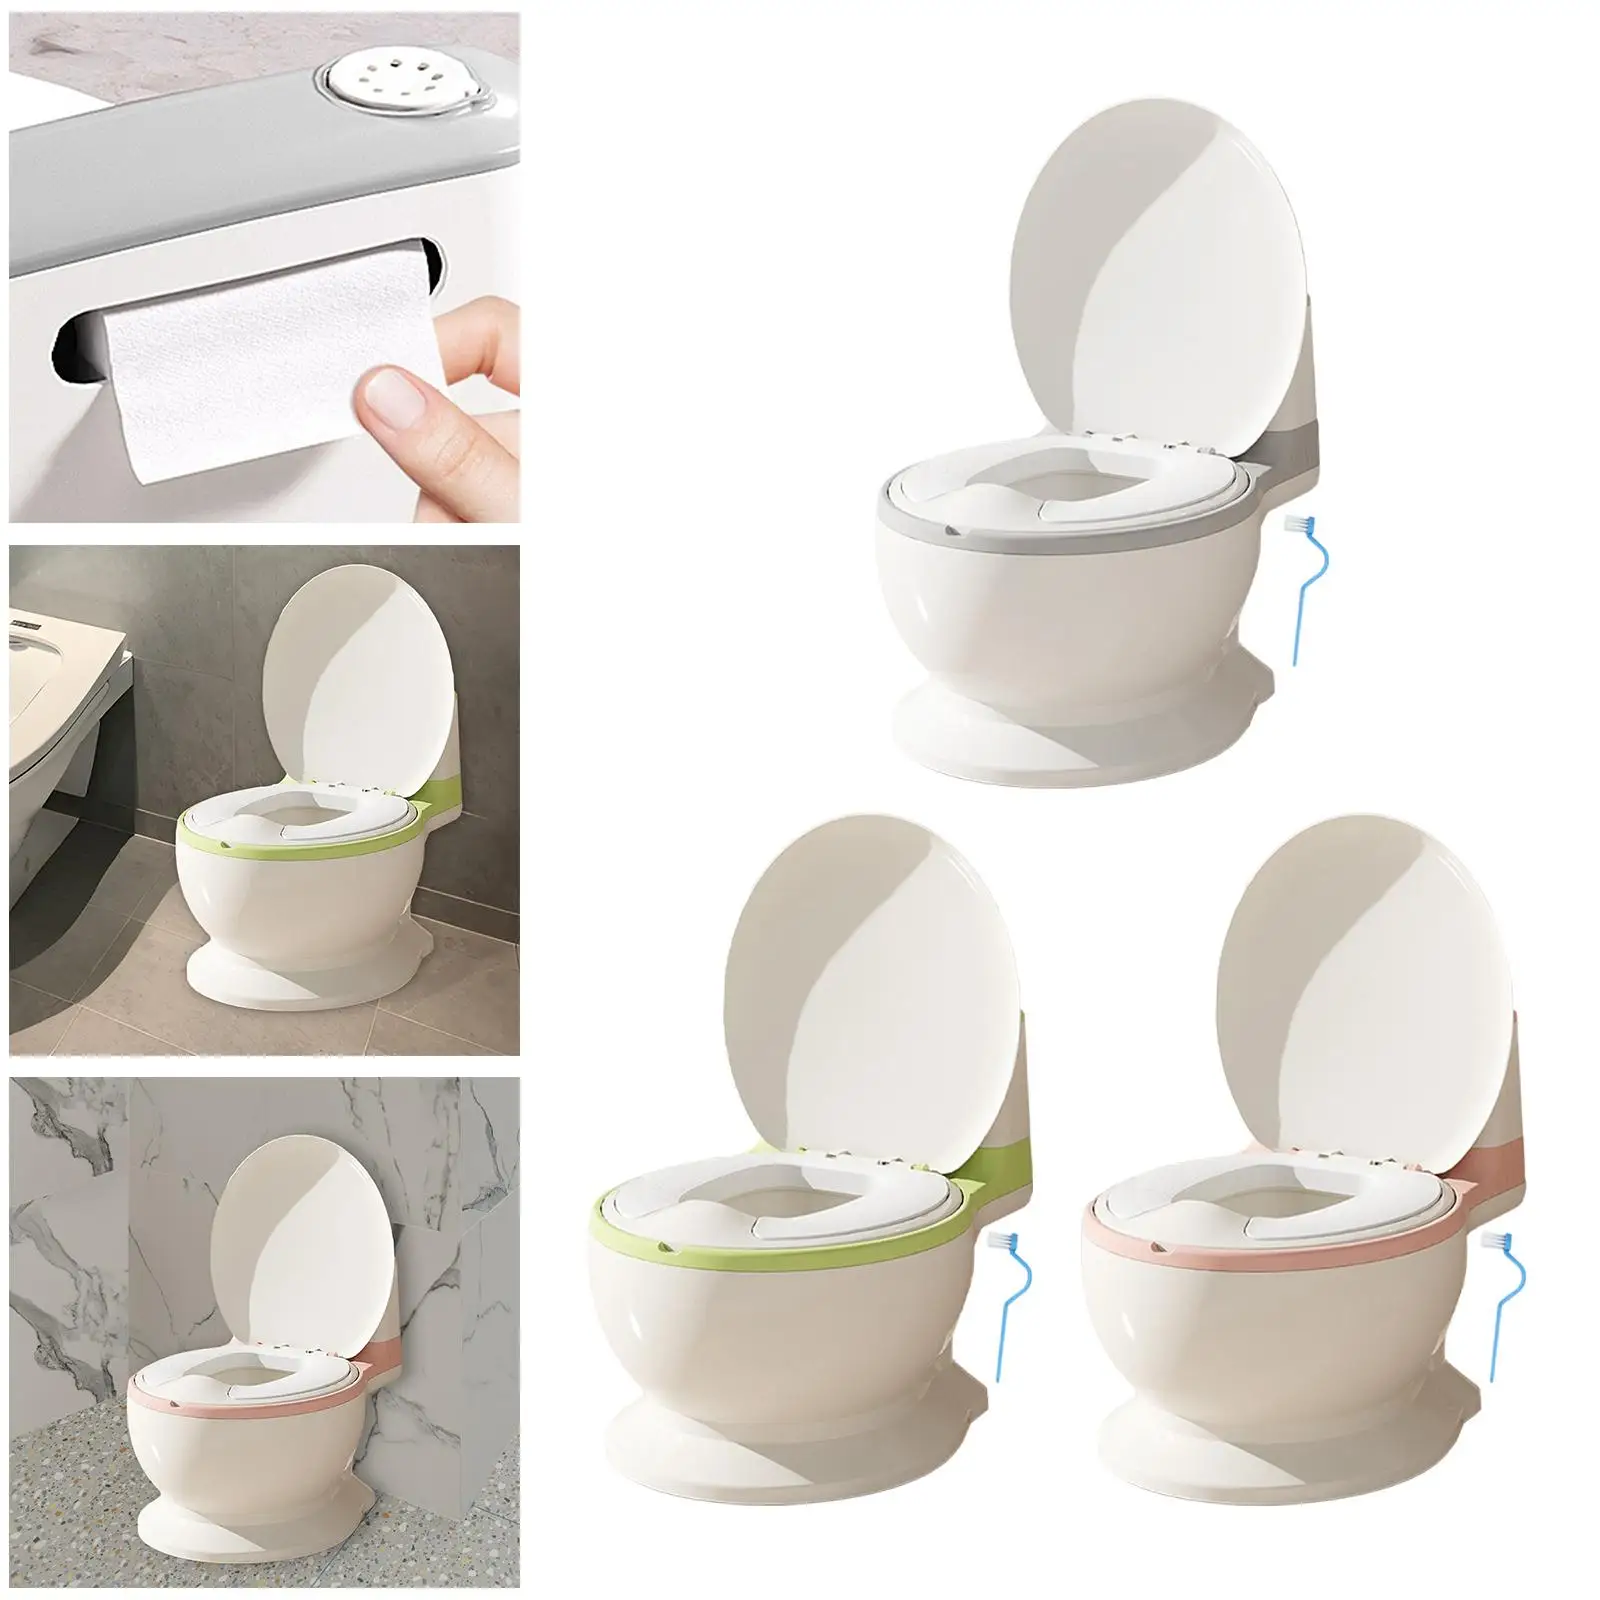 Toilet Training Potty Includes Cleaning Brush Kids Potty Chair for Infants